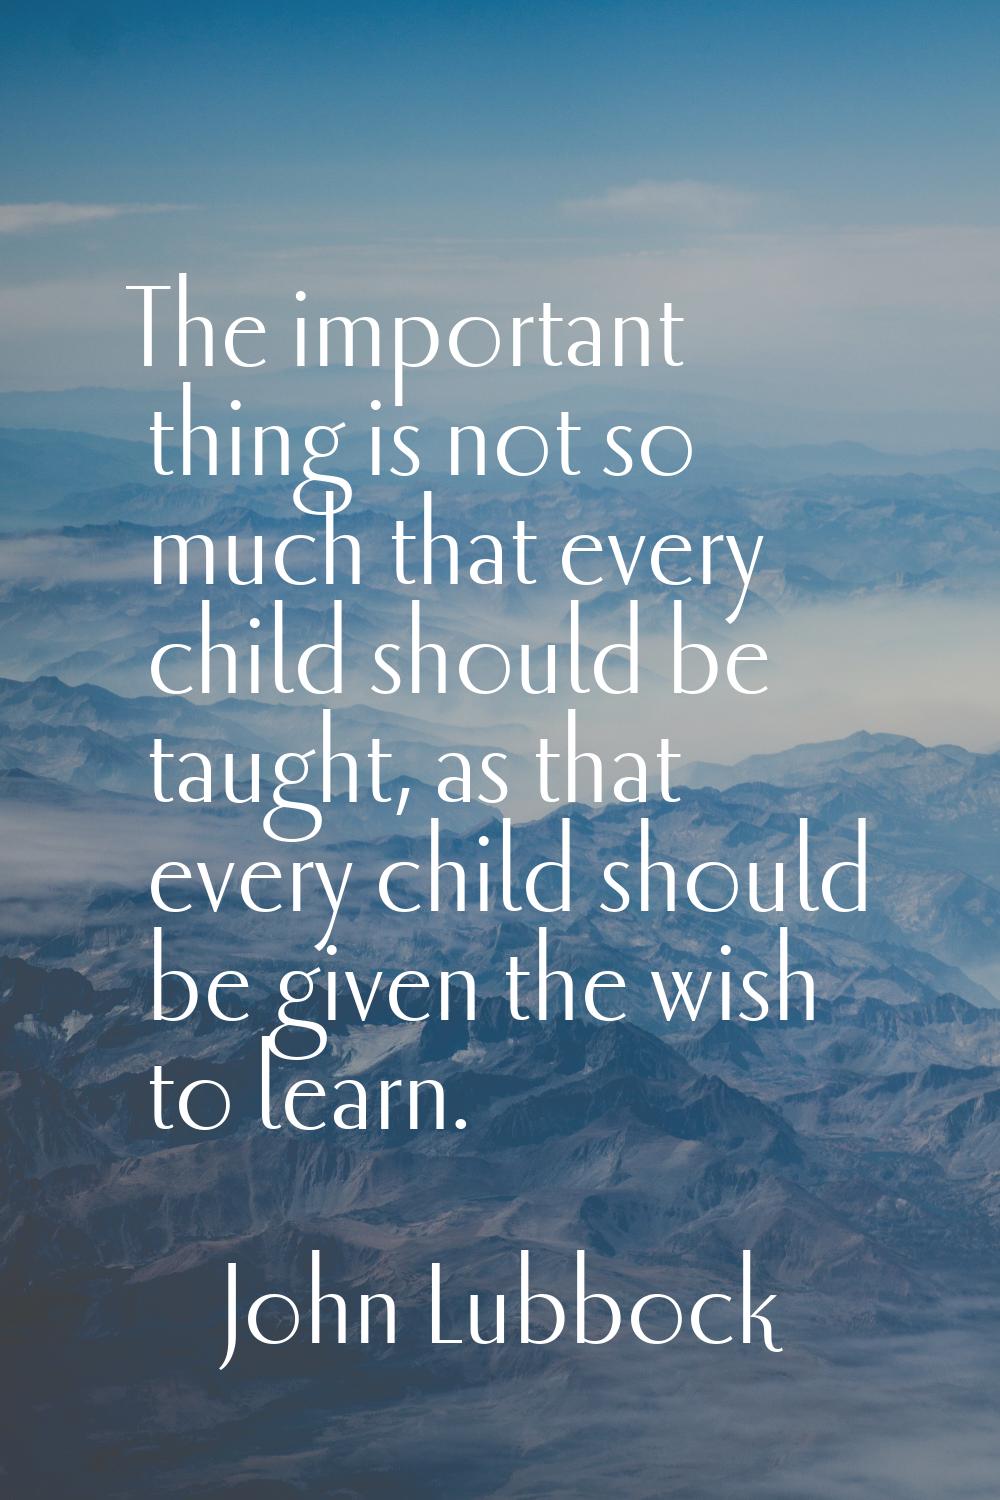 The important thing is not so much that every child should be taught, as that every child should be